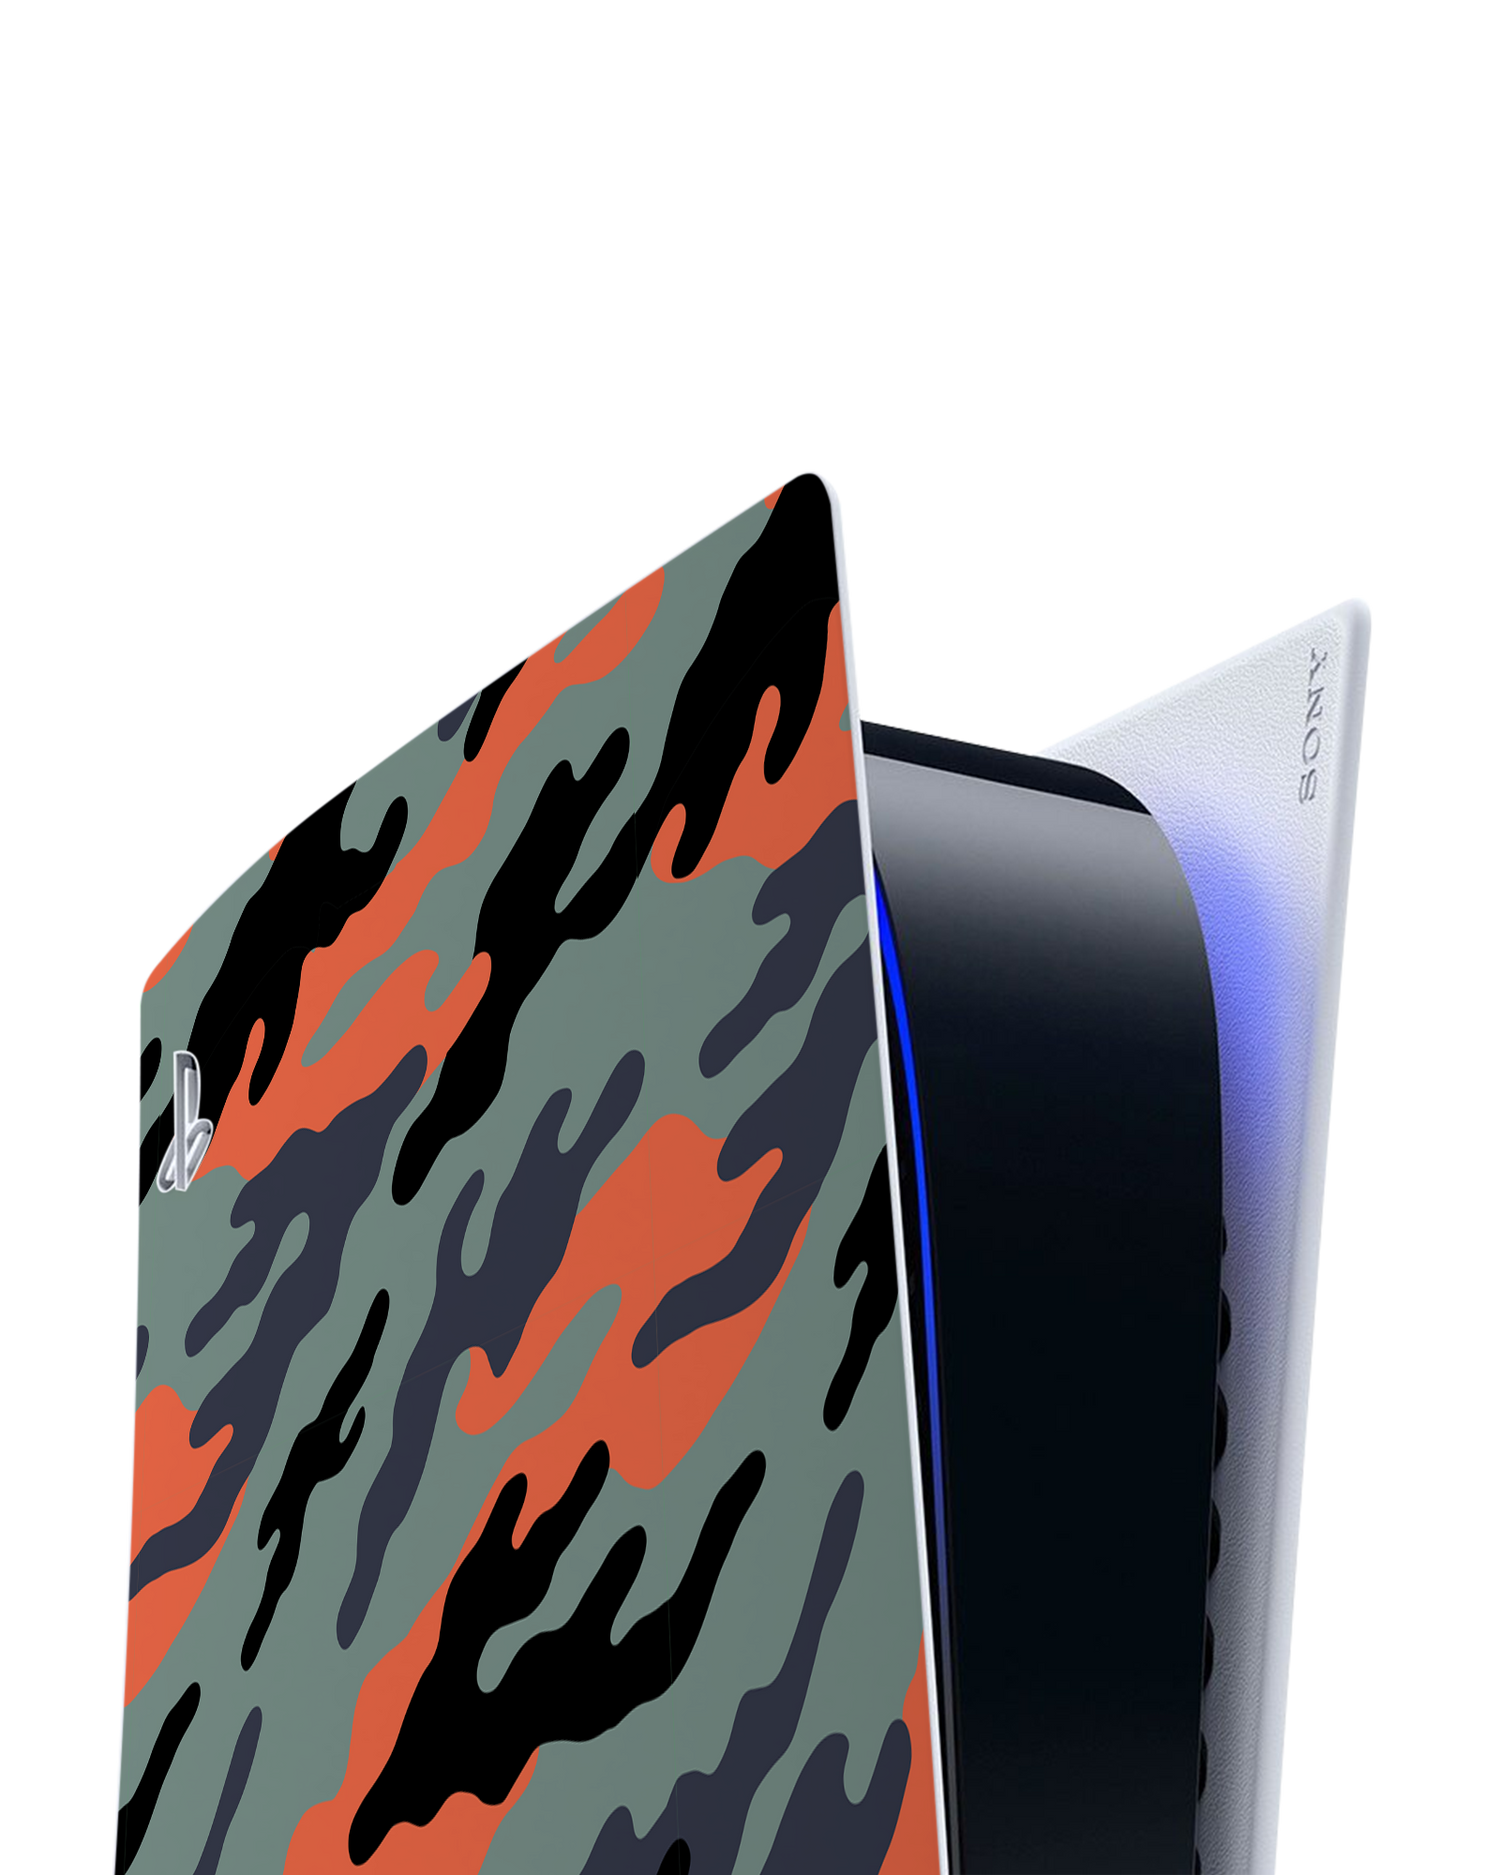 Camo Sunset Console Skin for Sony PlayStation 5 Digital Edition: Detail shot